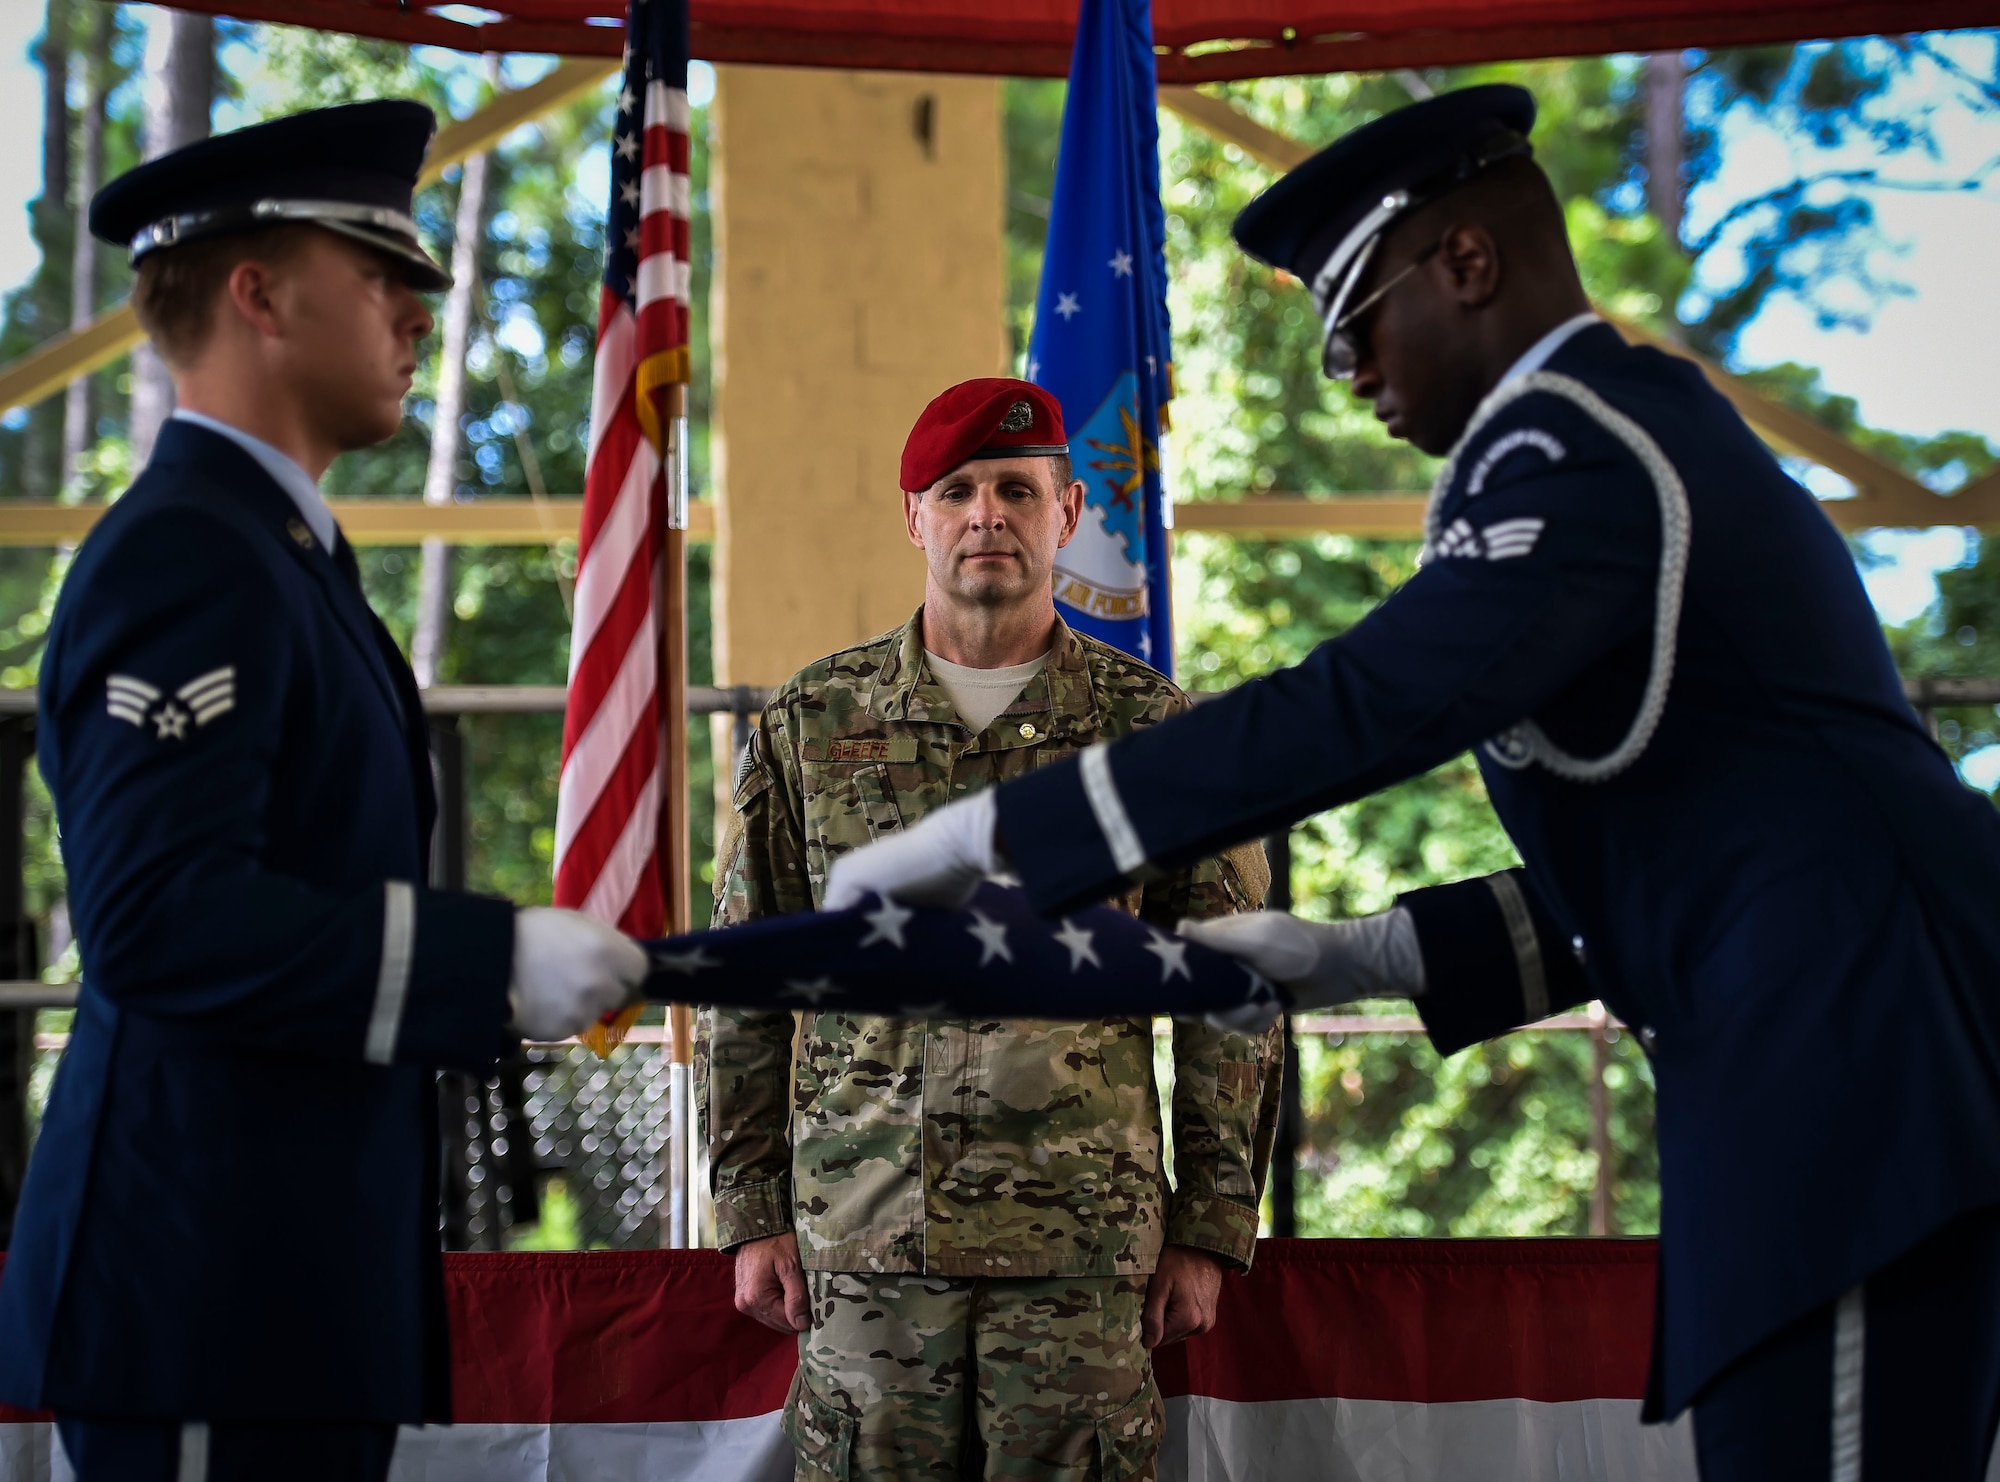 The Hurlburt Field Honor Guard fold an American Flag during Chief Master Sgt. Sean Gleffe’s, combat control functional manager for Air Force Special Operations Command, retirement ceremony at Hurlburt Field, Fla., July 15, 2016. Gleffe retired after 30 years as a Special Tactics combat controller. Throughout his Special Tactics career, Gleffe was certified a static line jump master, military freefall jump master and military dive supervisor. (U.S. Air Force photo by Senior Airman Ryan Conroy)